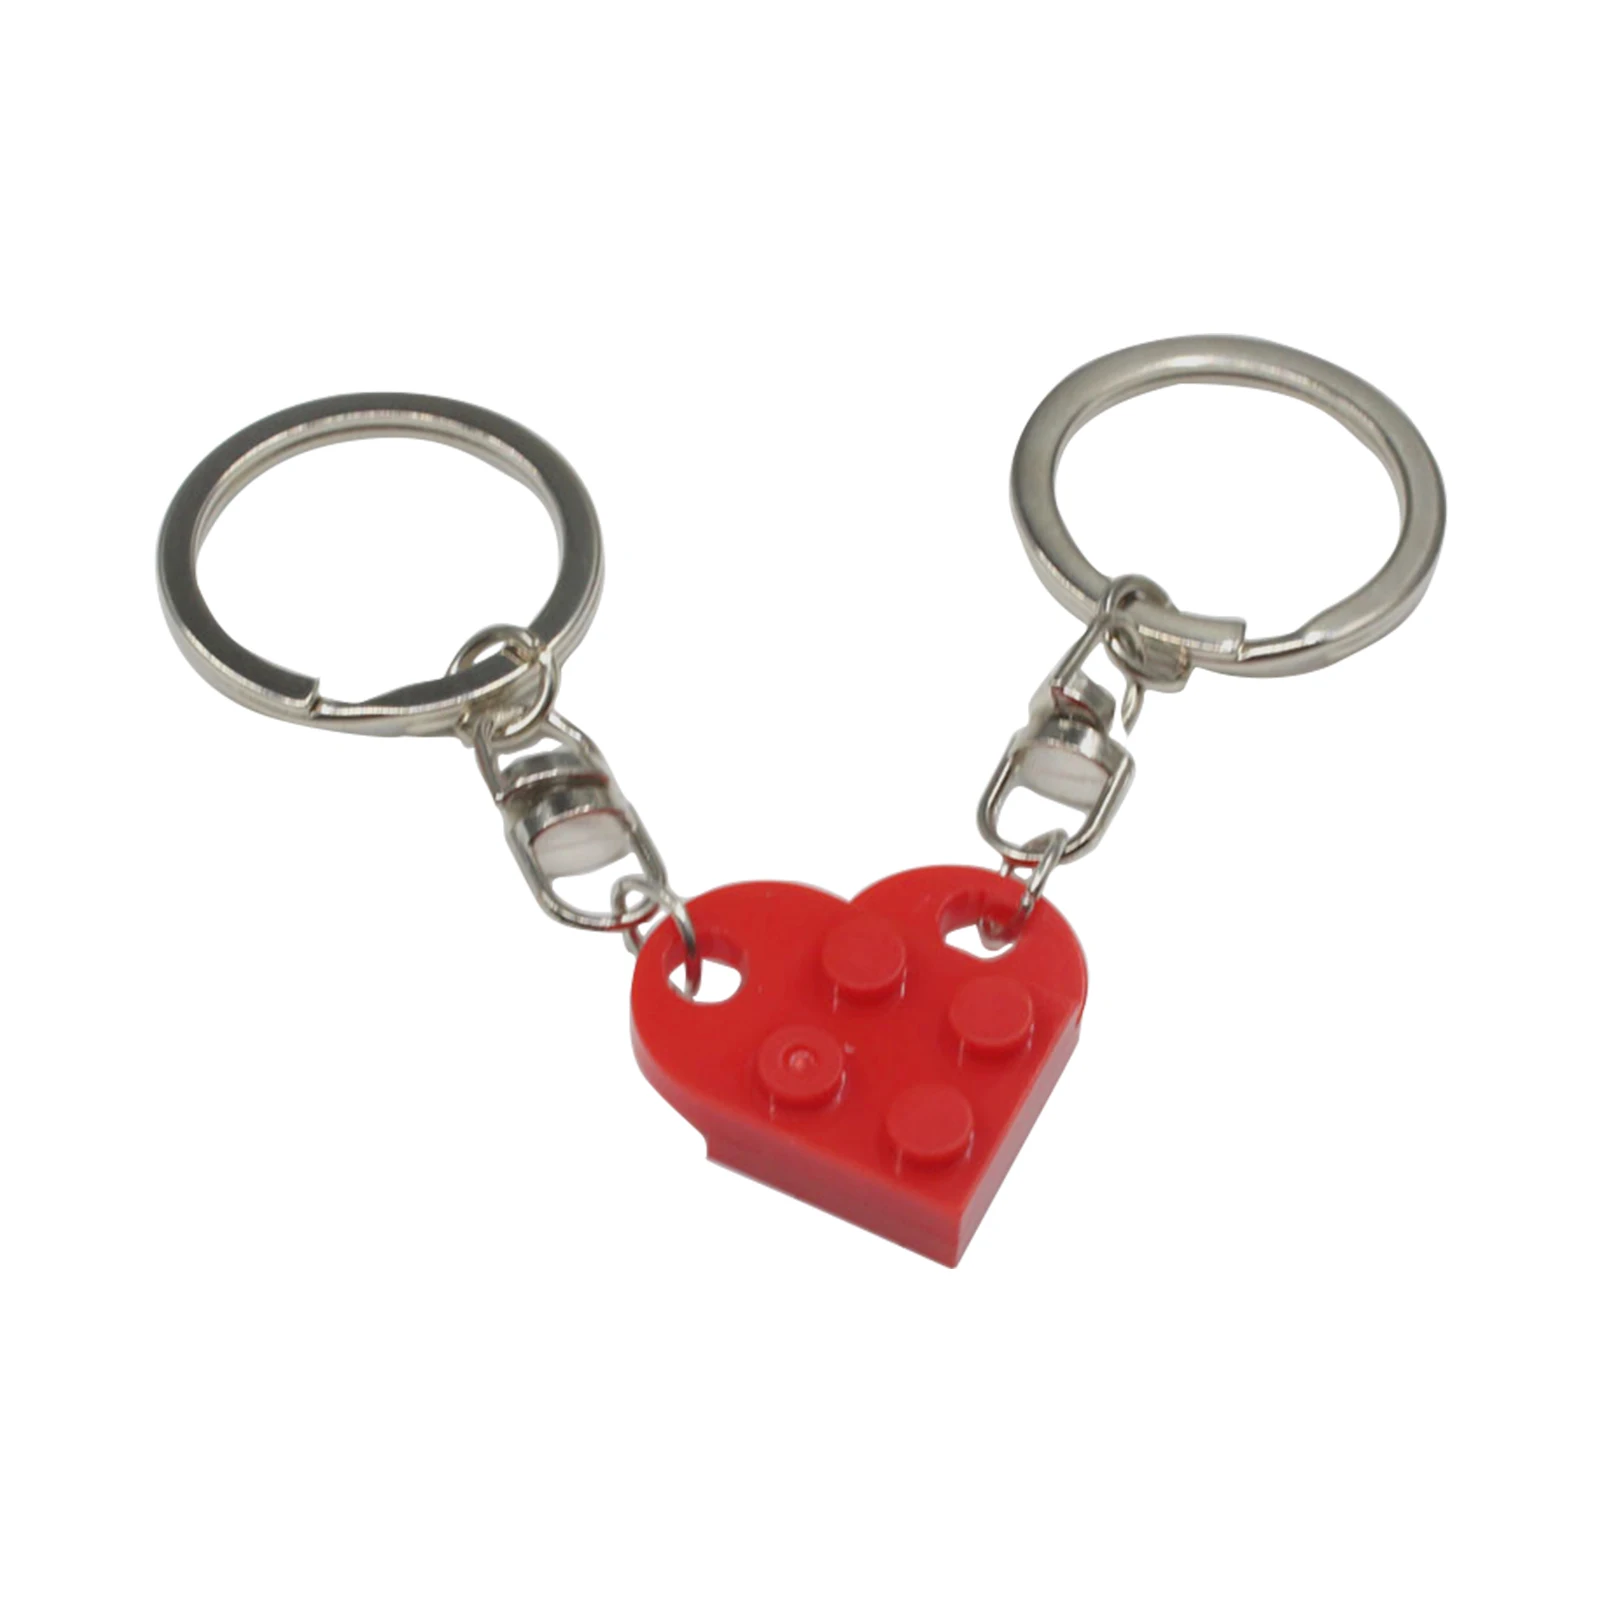 

Boyfriend Girlfriend Matching Brick Assembly Heart Cute Key Ring Valentines Day Couples Friendship Eye Catching Carry On